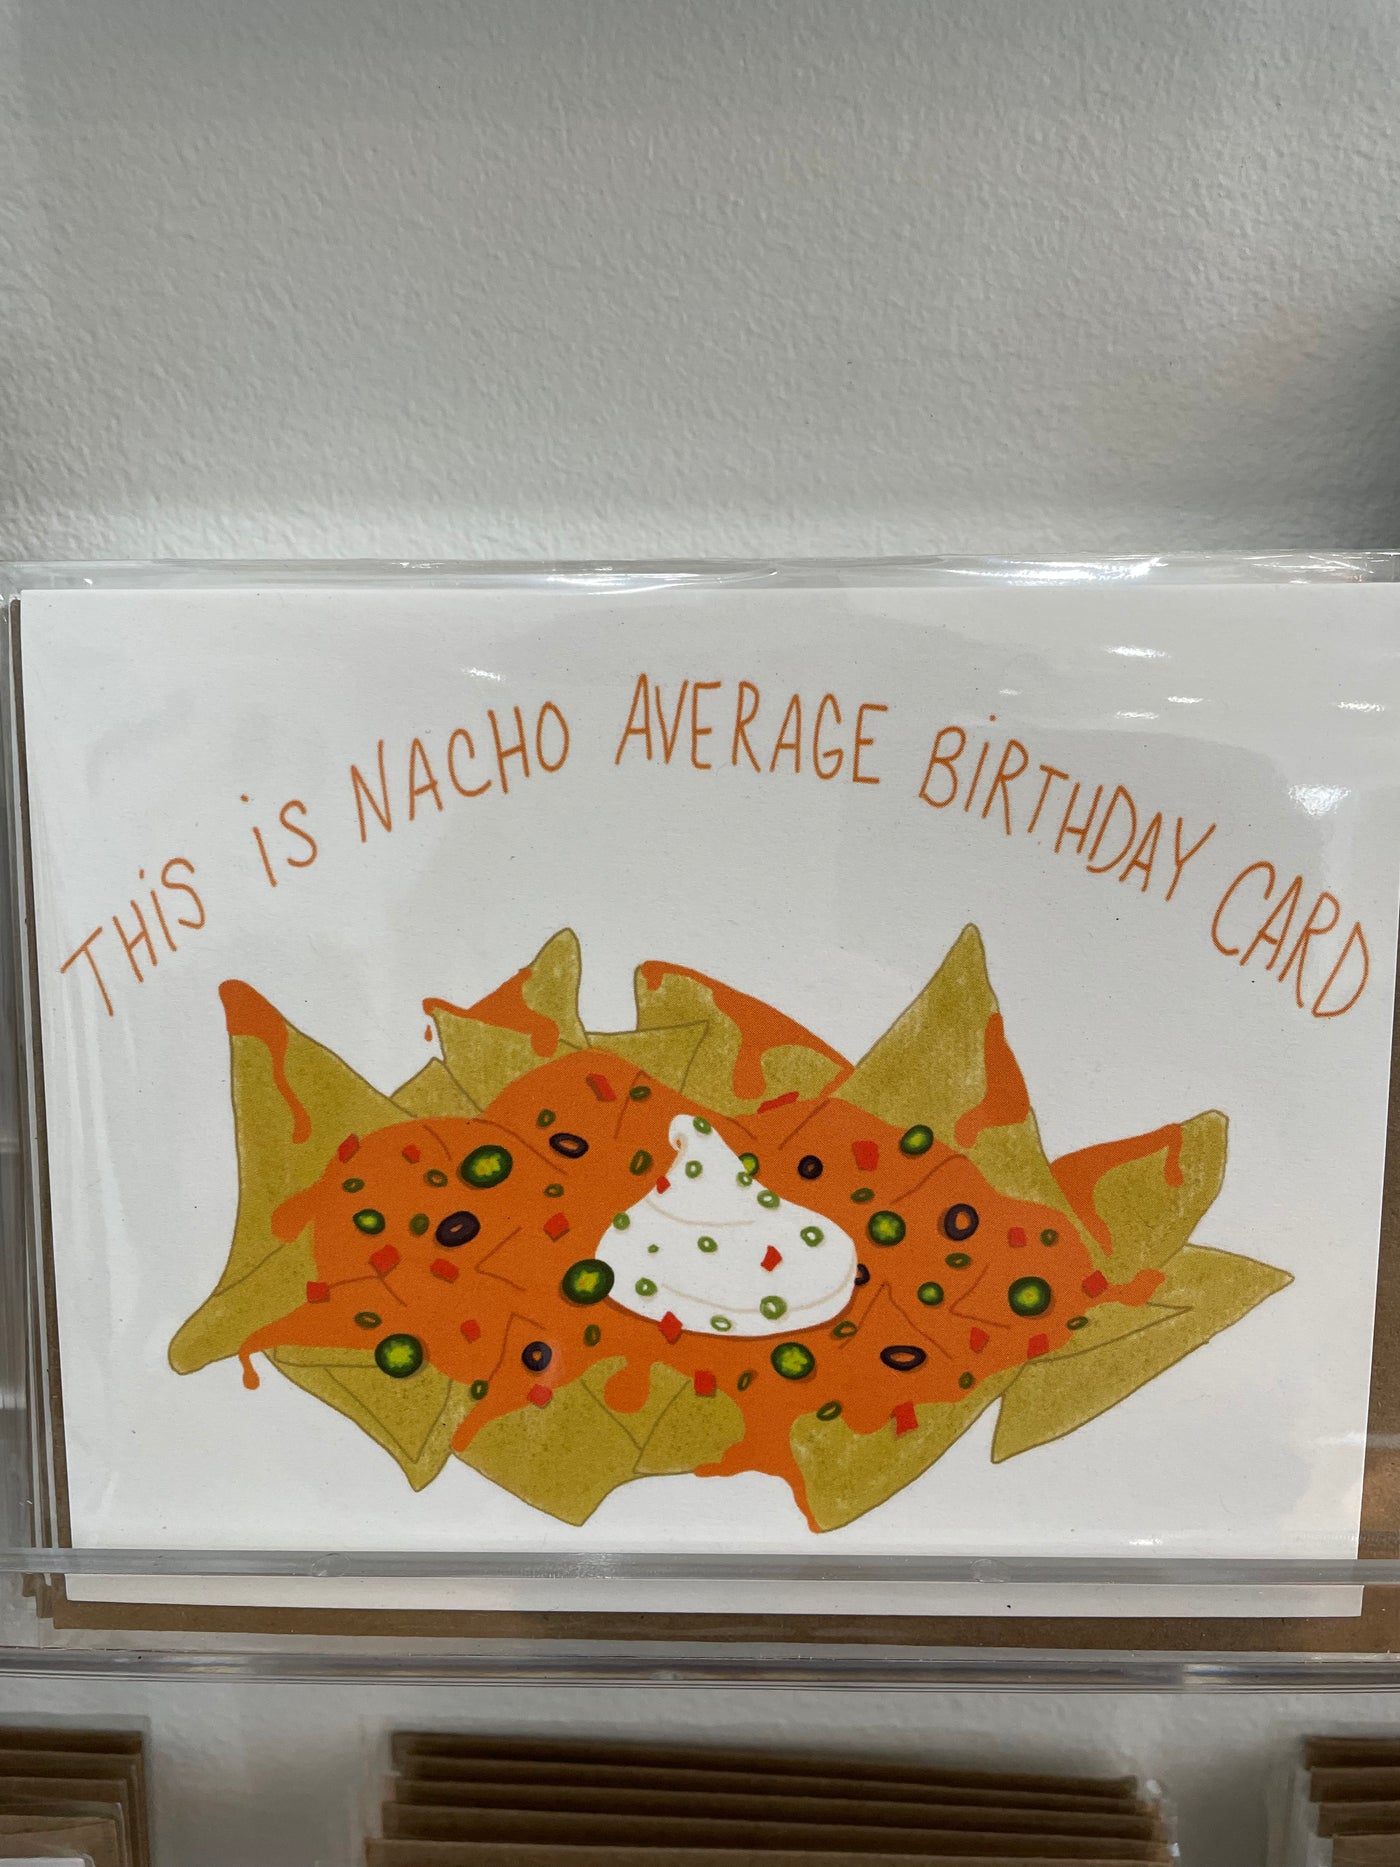 Nacho average birthday card from a woman owned business